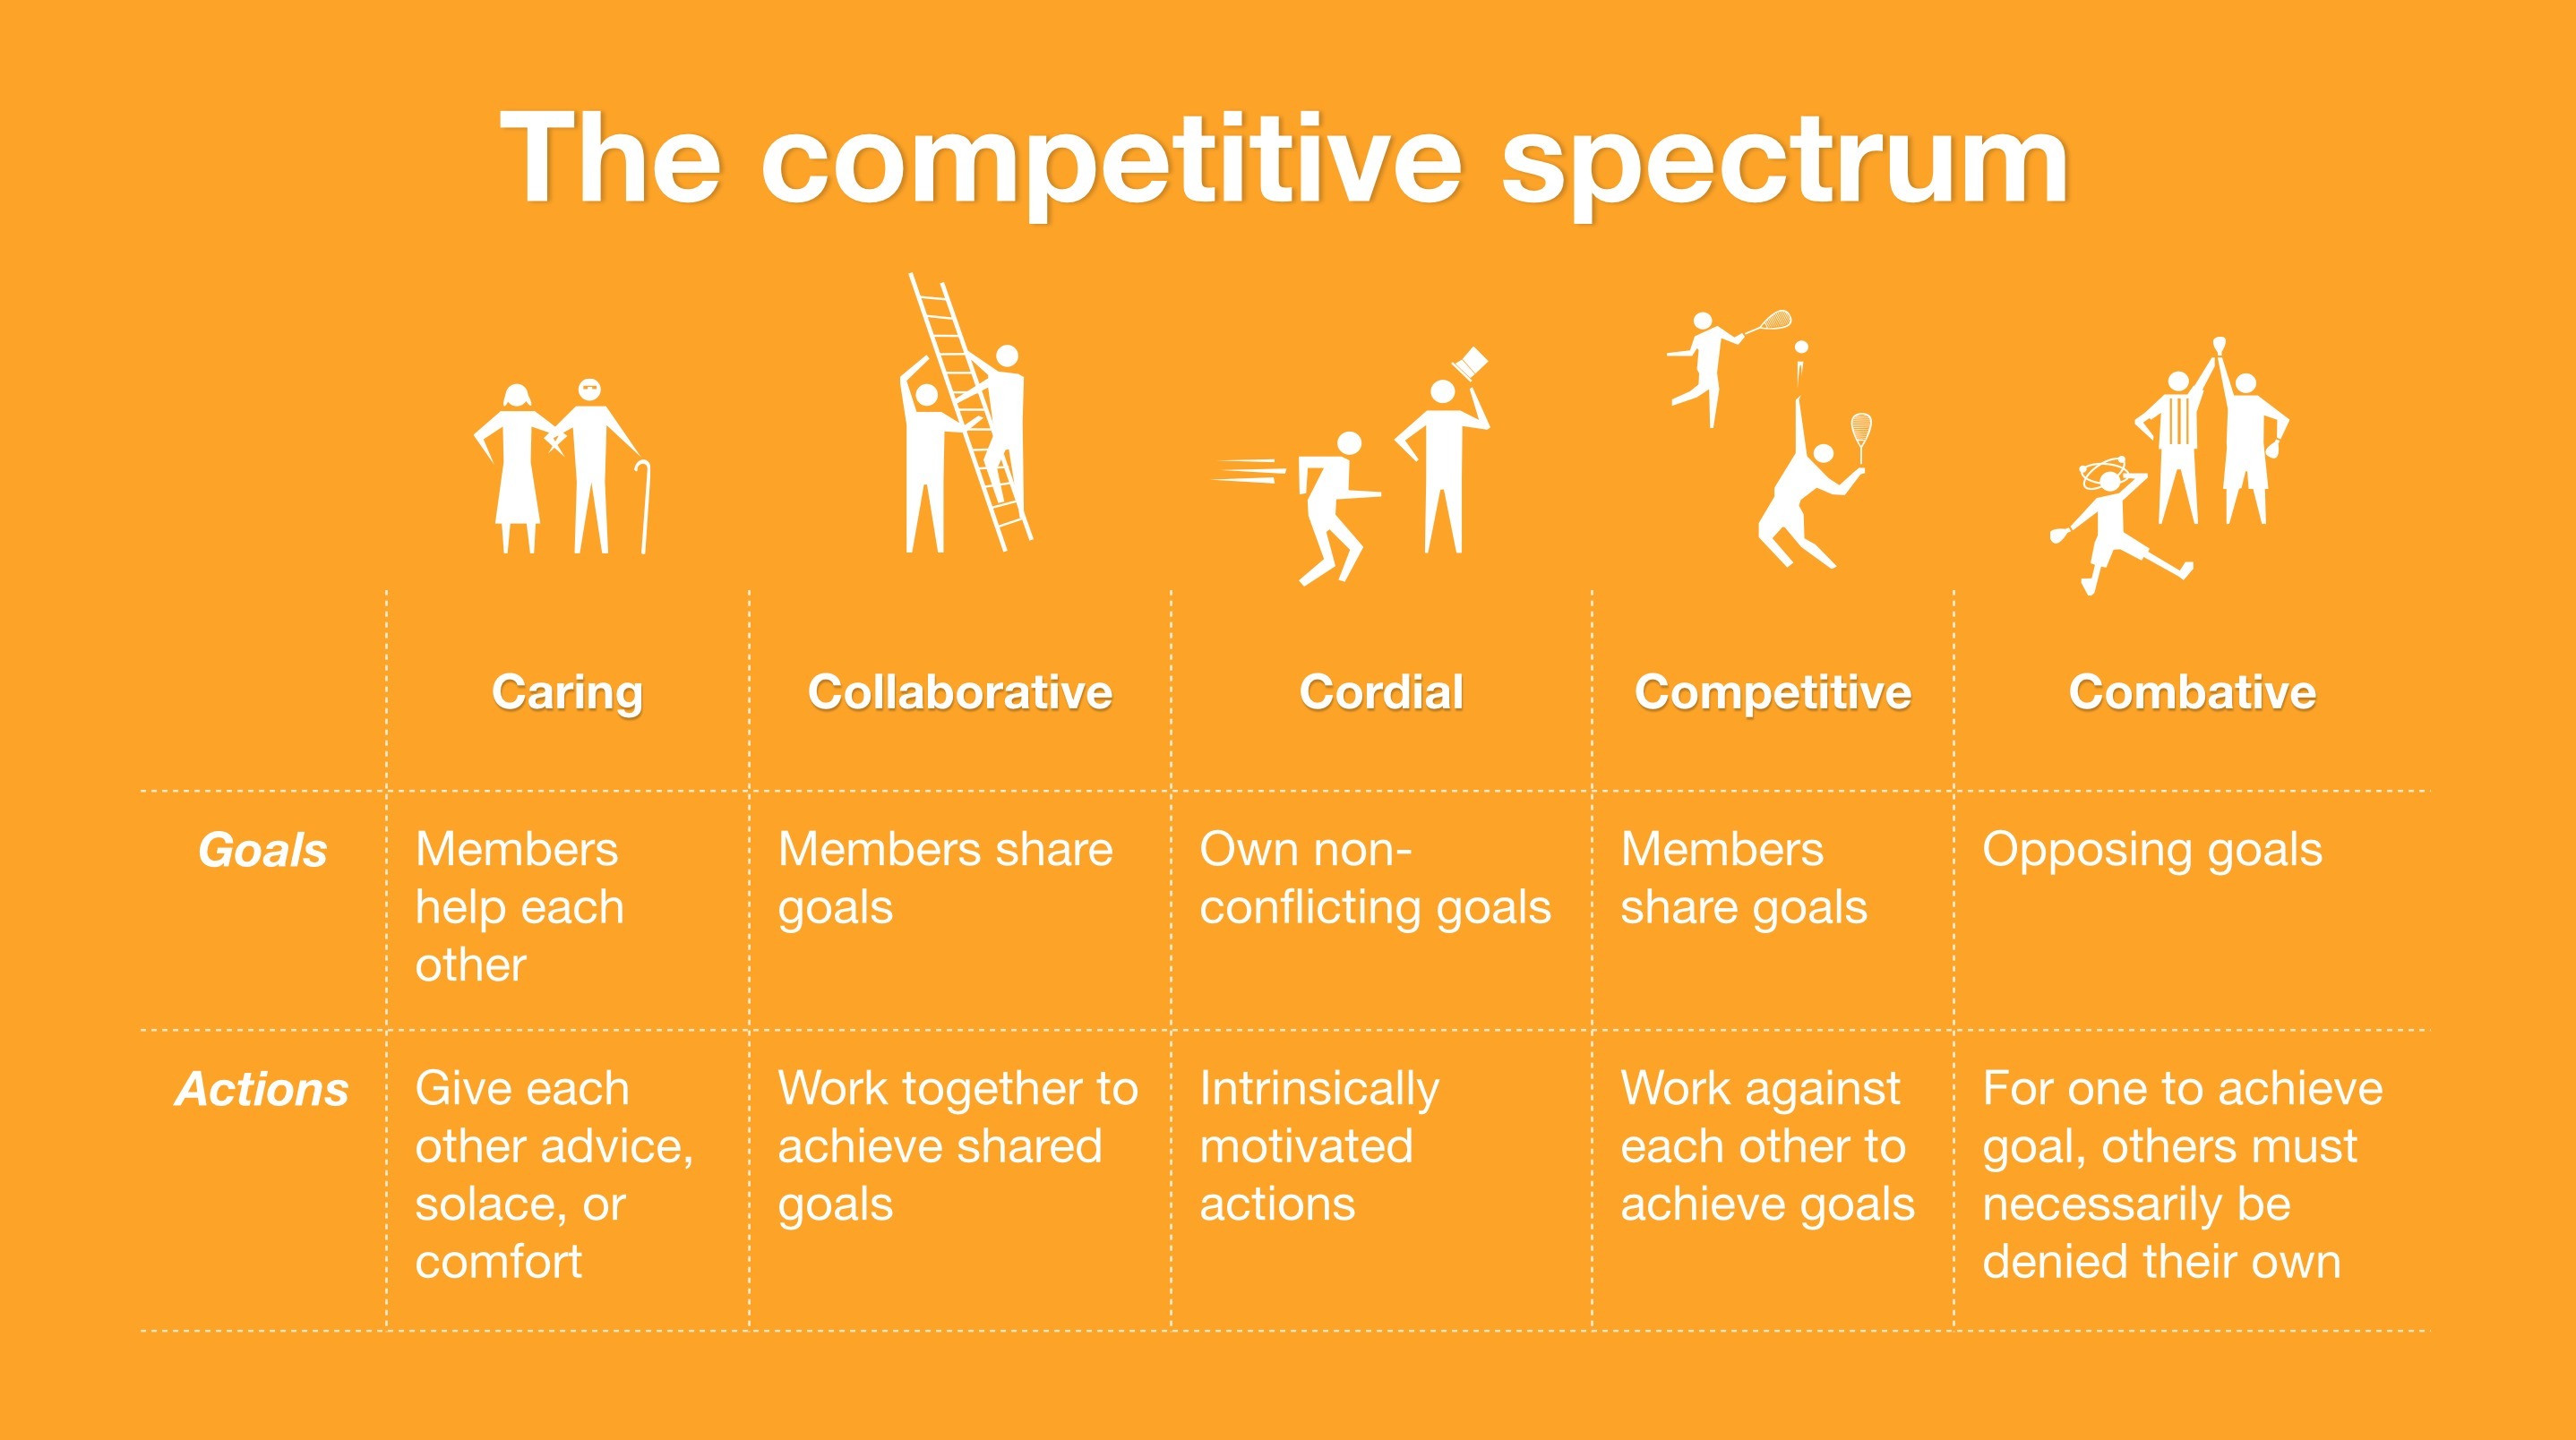 The competitive spectrum - originated from the Yahoo Design Pattern Library